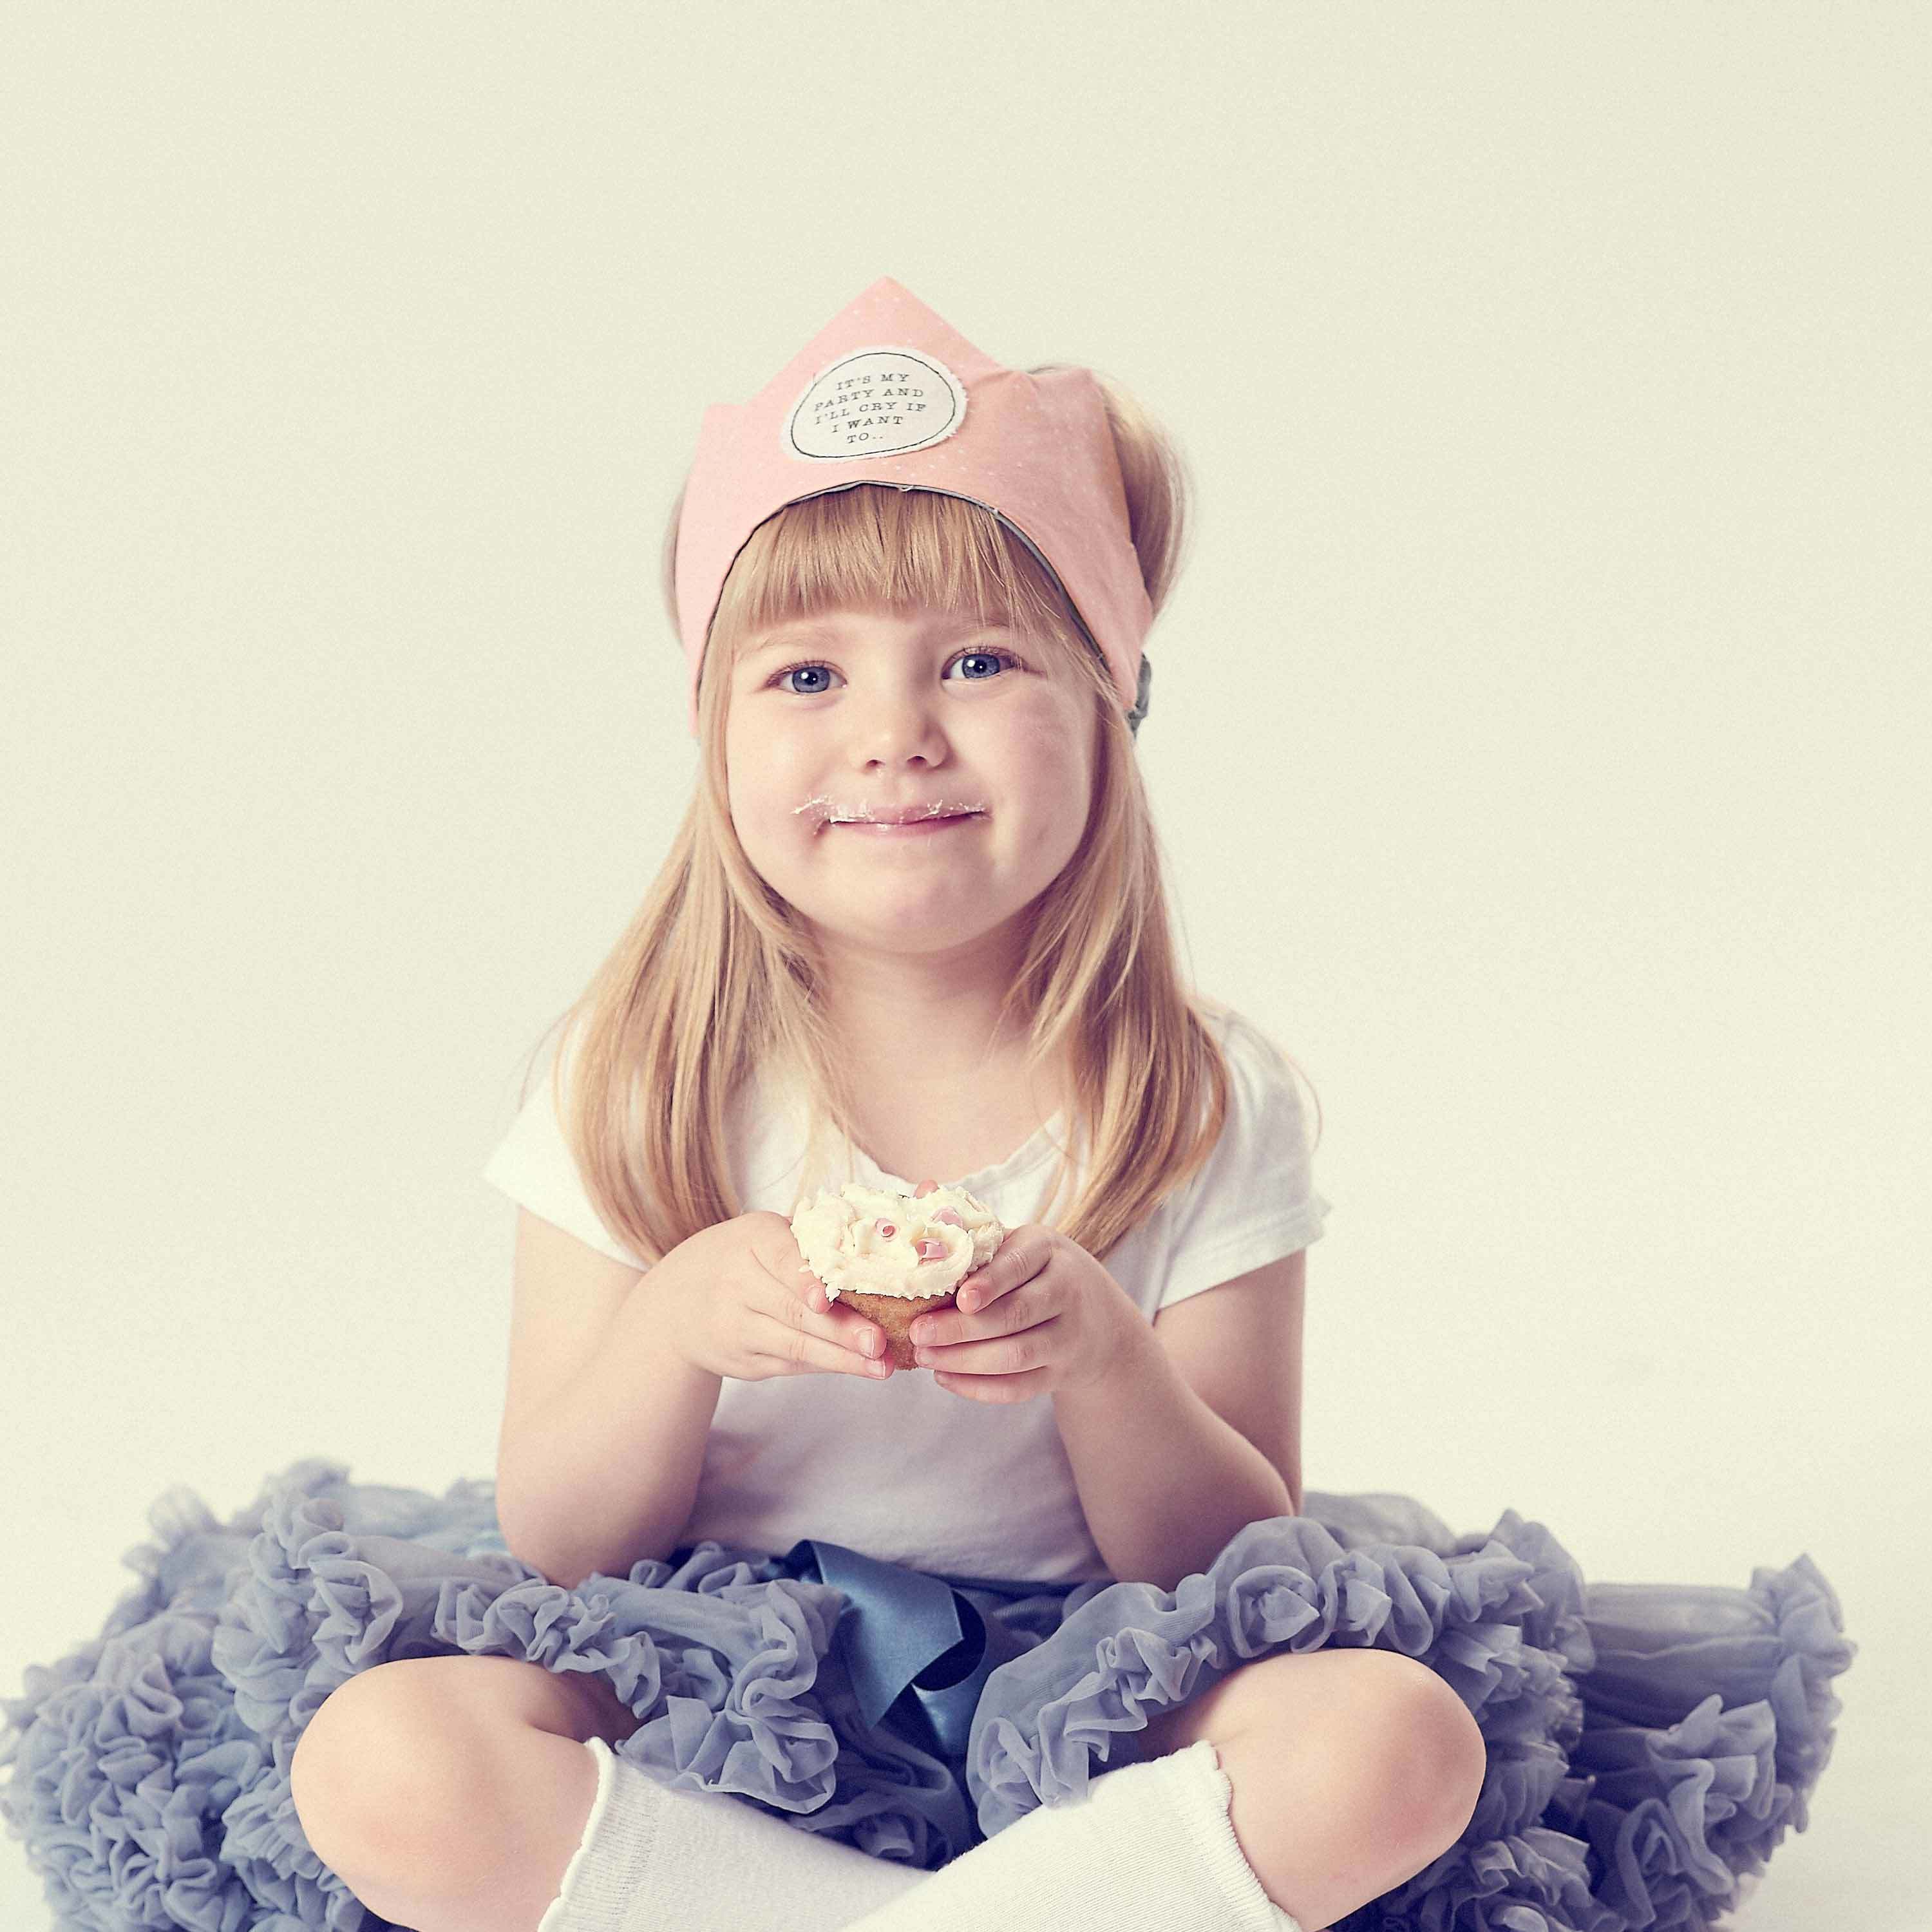 children's accessories, girl wearing tutu and crown eating a cake